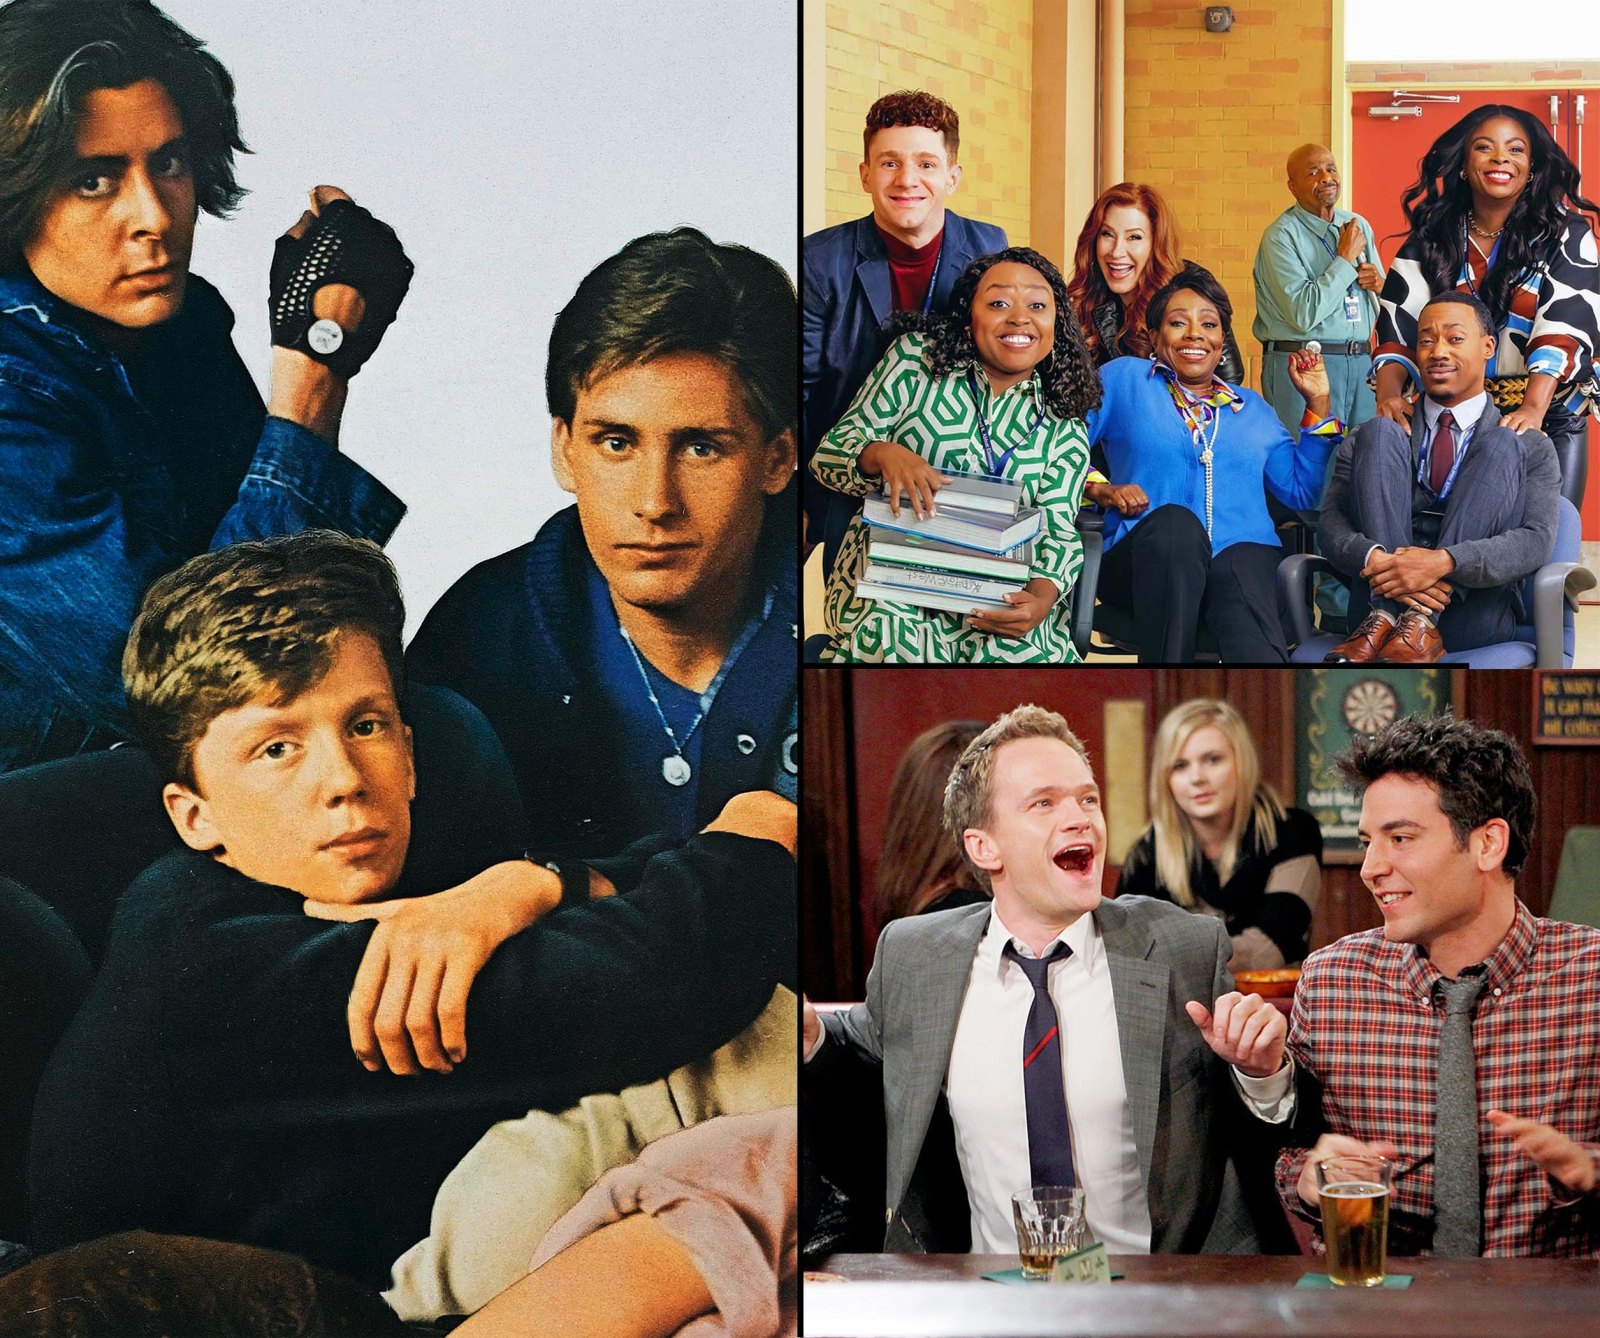 TV Shows That Had an Episode Inspired by 'The Breakfast Club': From 'Abbott Elementary' to 'How I Met Your Mother'